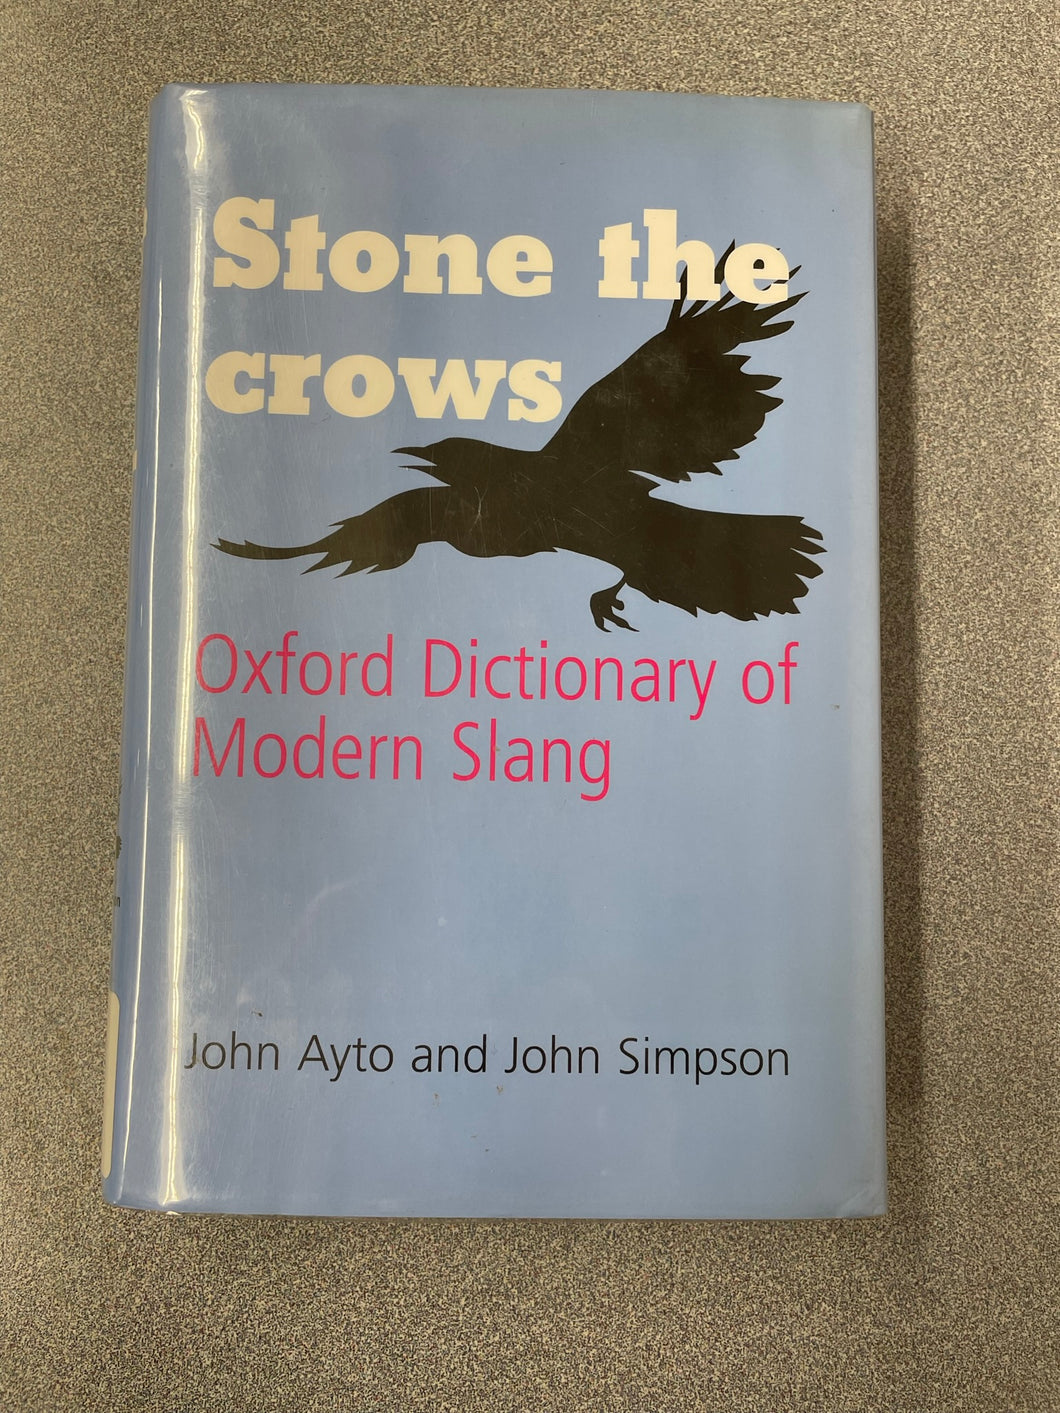 Stone the Crows: Oxford Dictionary of Modern Slang, Ayto, John and John Simpson [2008] REF 6/23